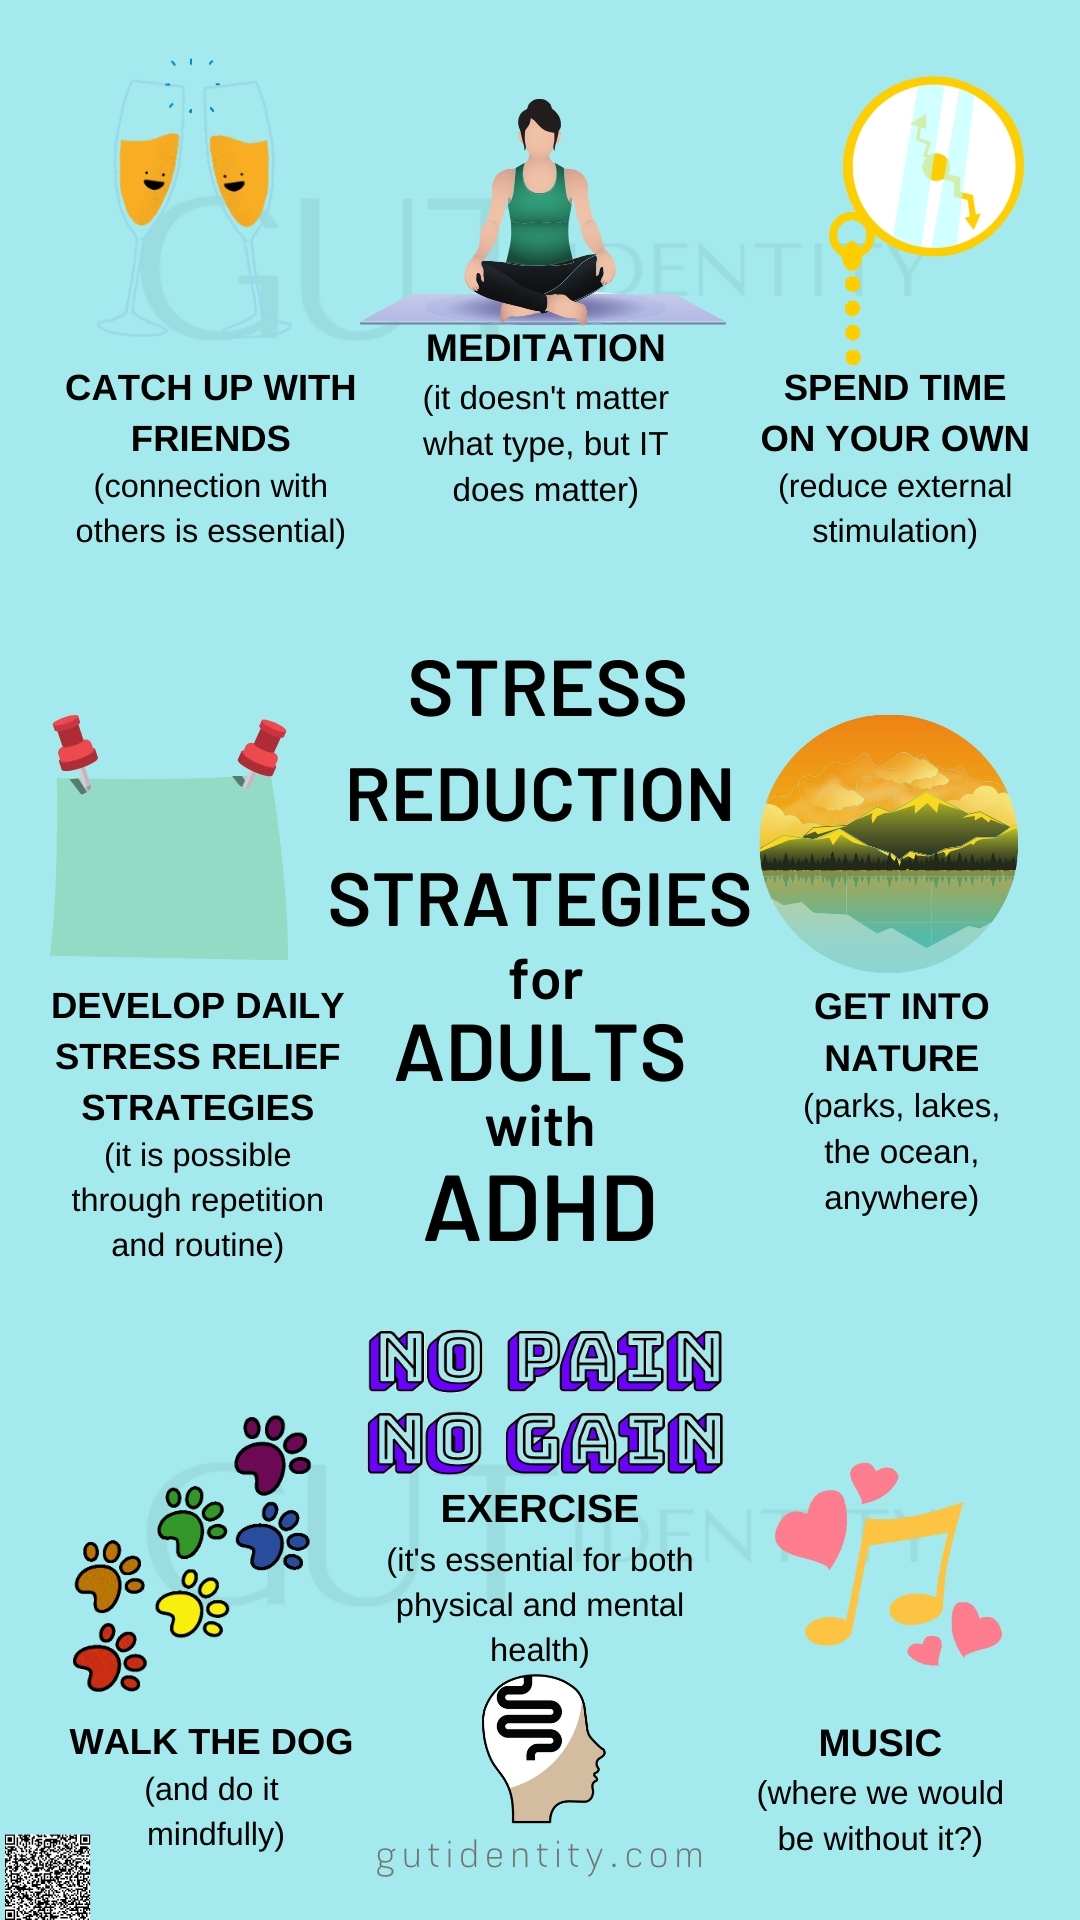 Stress Reduction Strategies for Adults with ADHD by Gutidentity